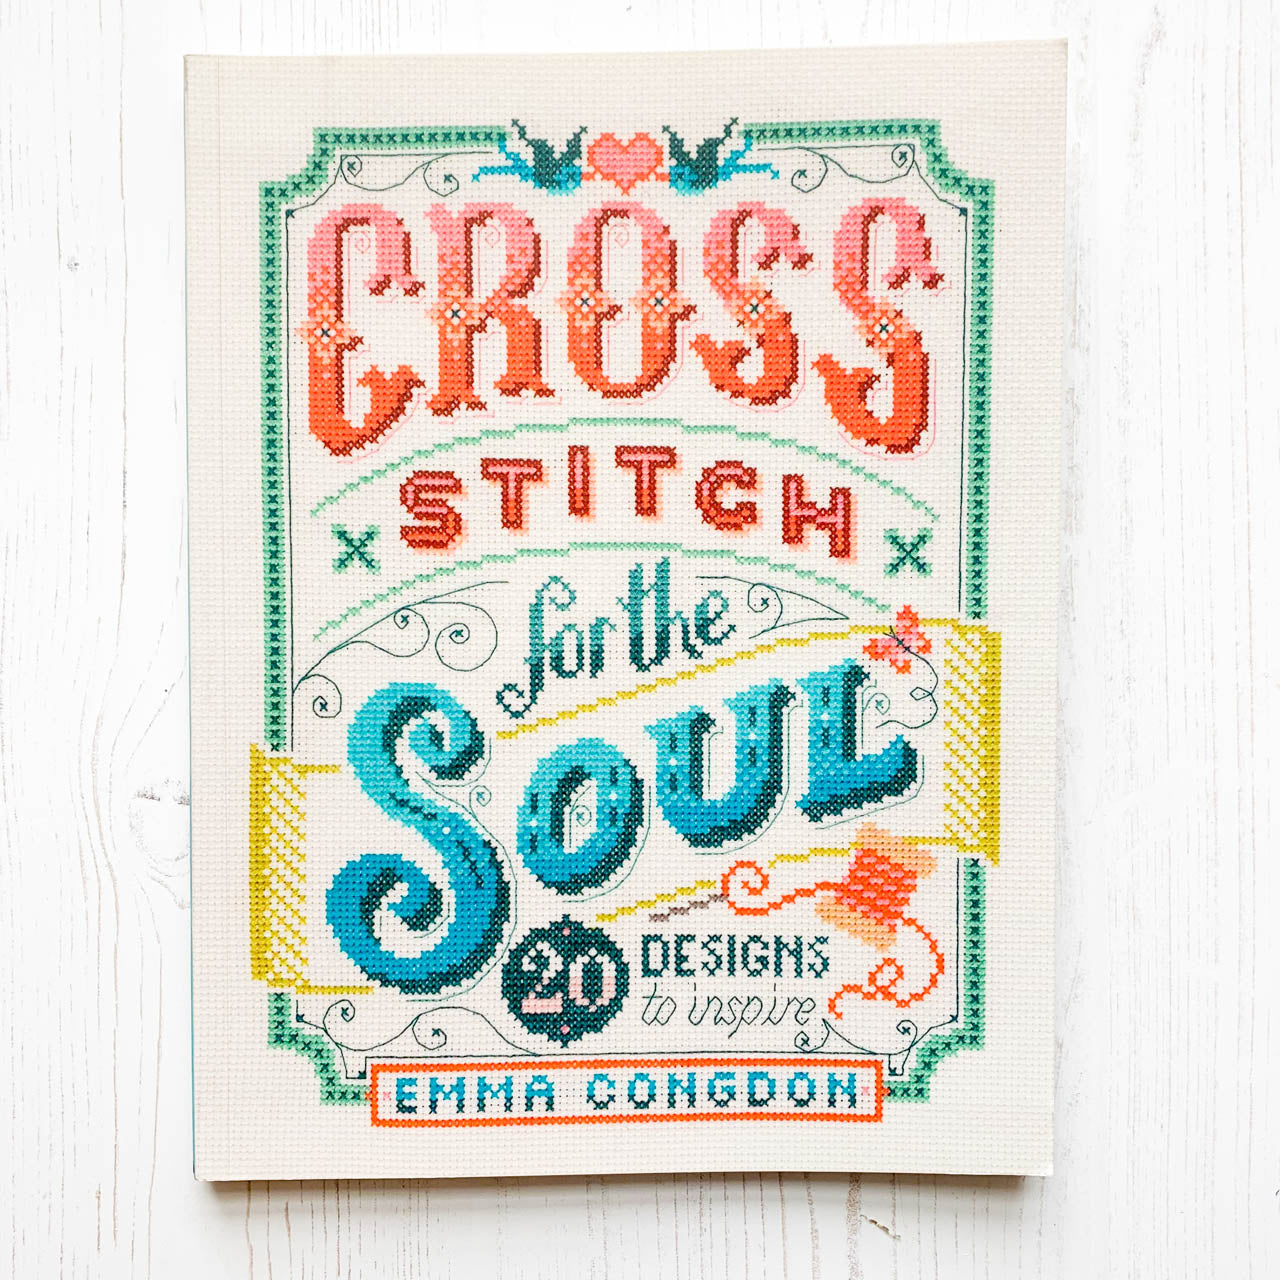 Cross Stitch for the Soul: 20 Designs to Inspire